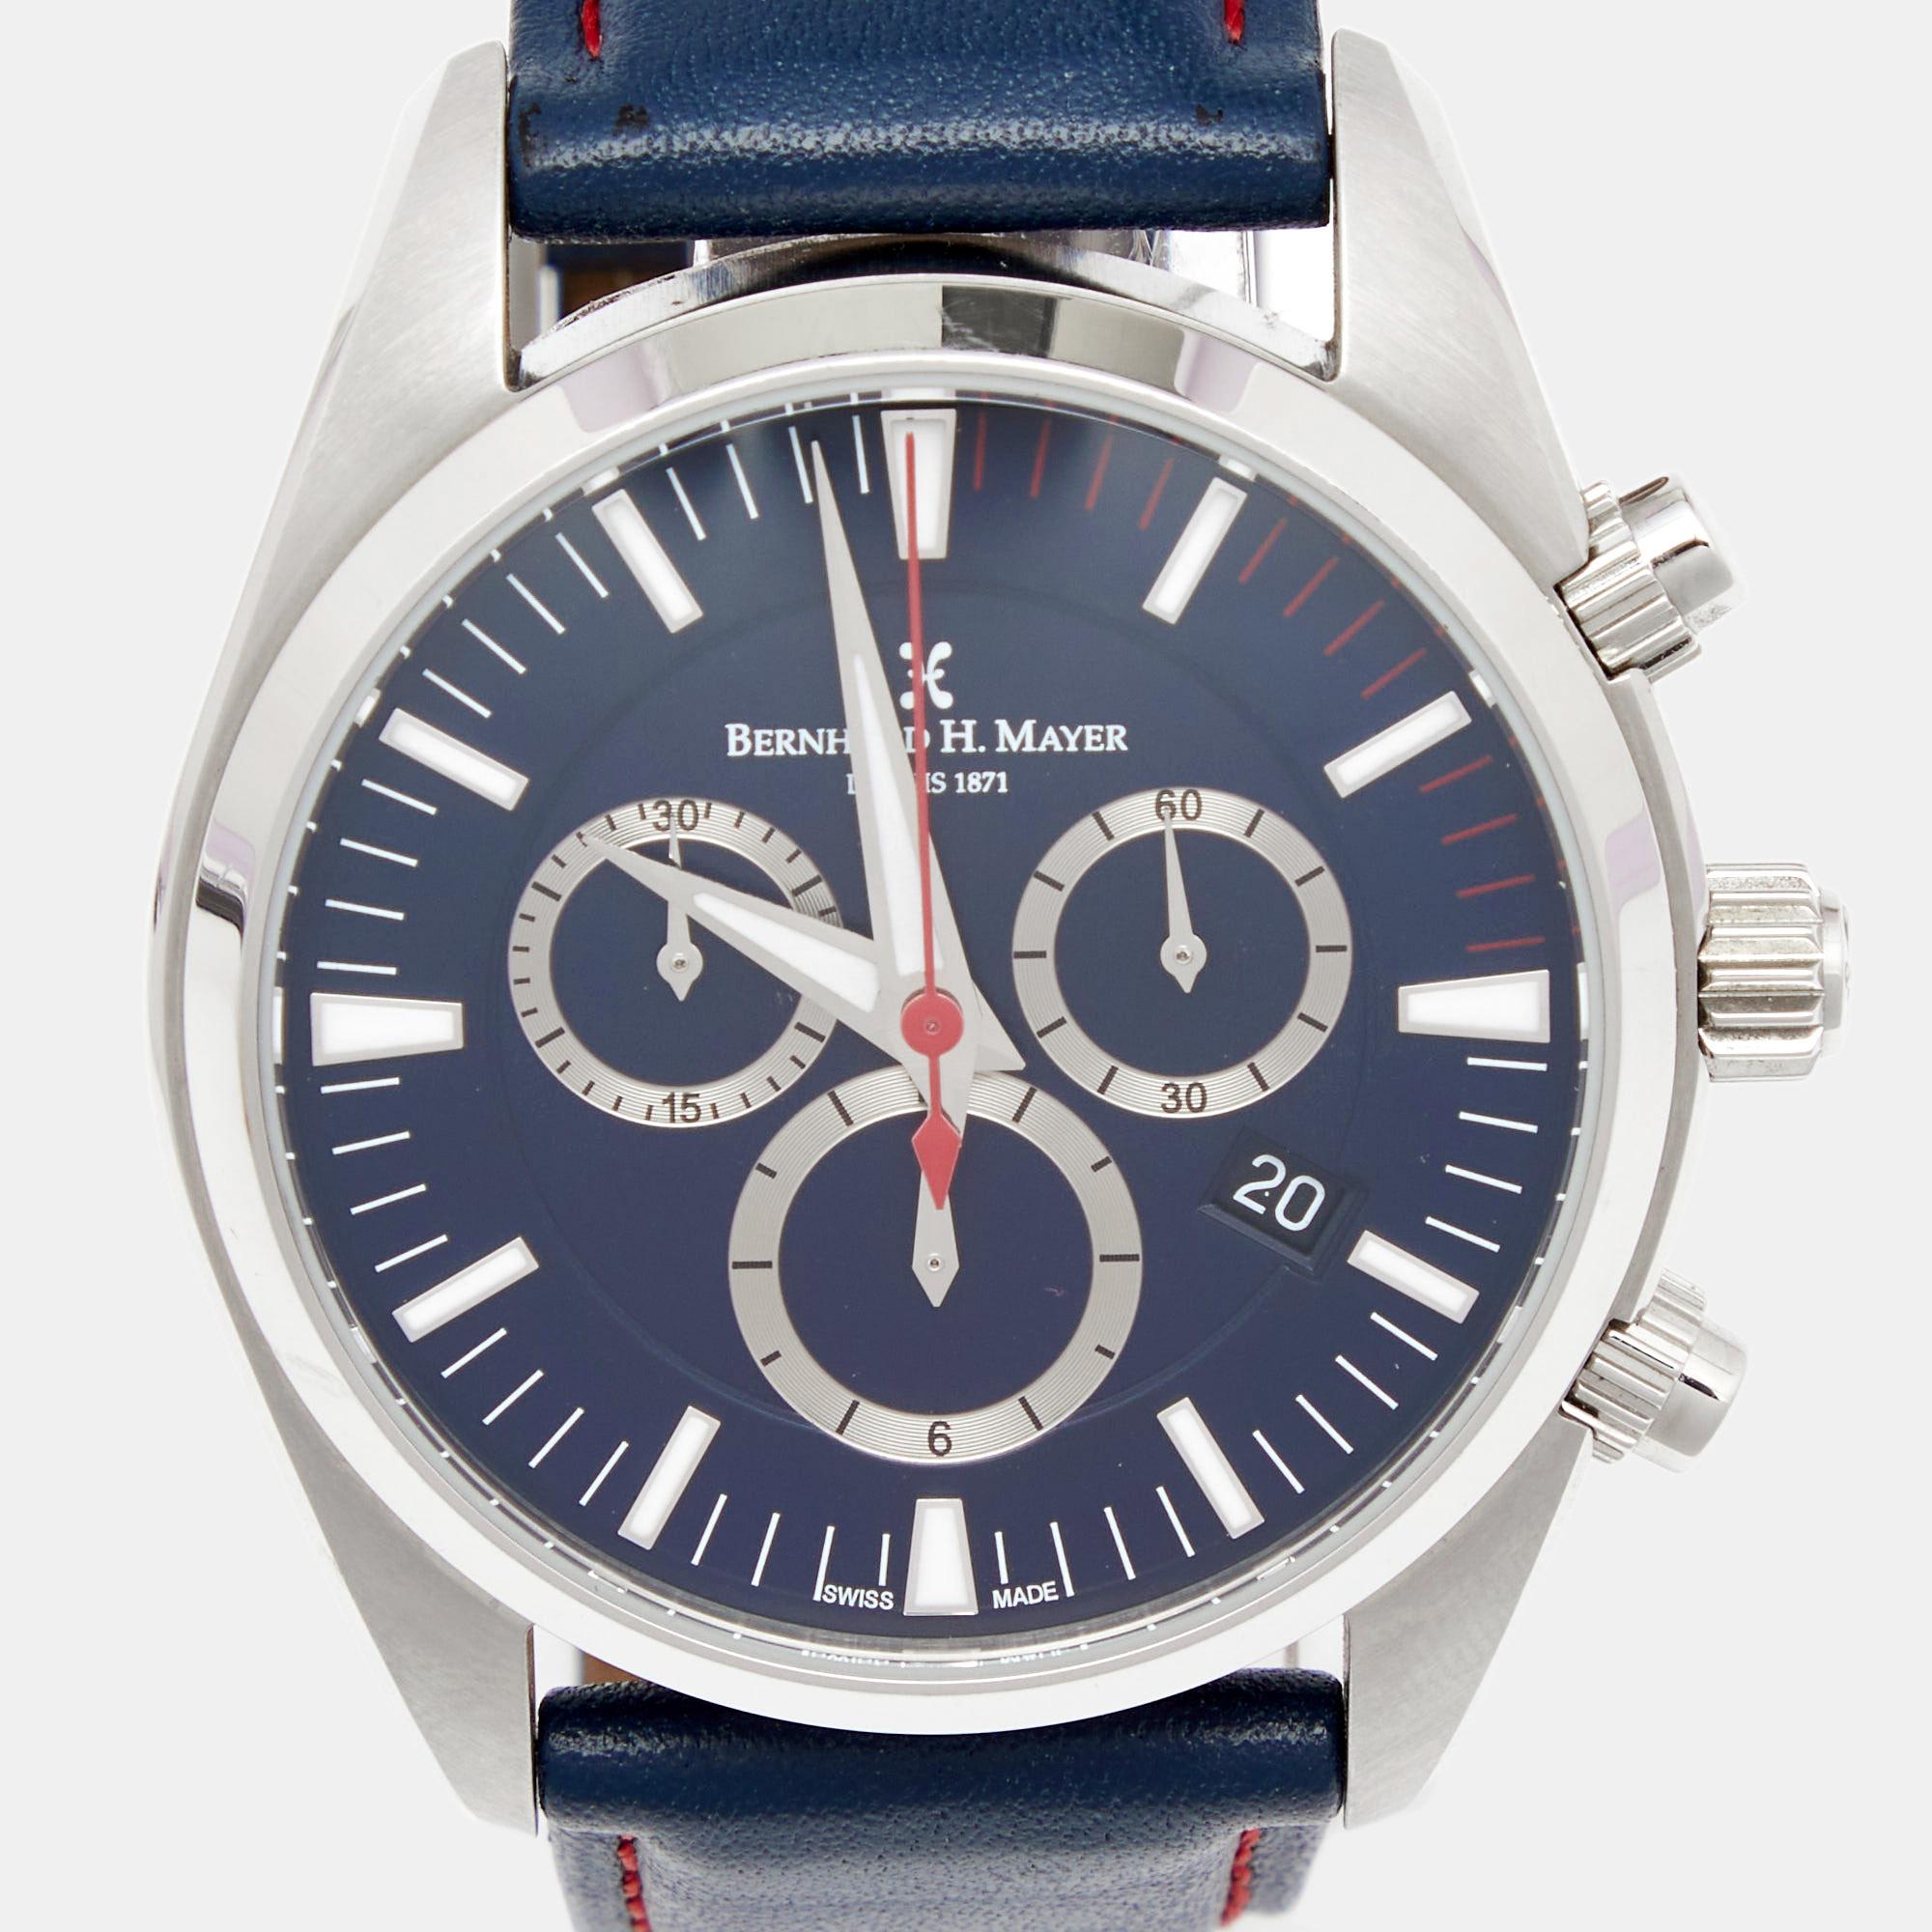 Designed for those who live to make every day count, and love to experience the thrill and sheer pleasure of life, Bernhard H. Mayer offers this Ascent Chronograph watch. It has a stainless steel case held by leather straps, perfect with a casual